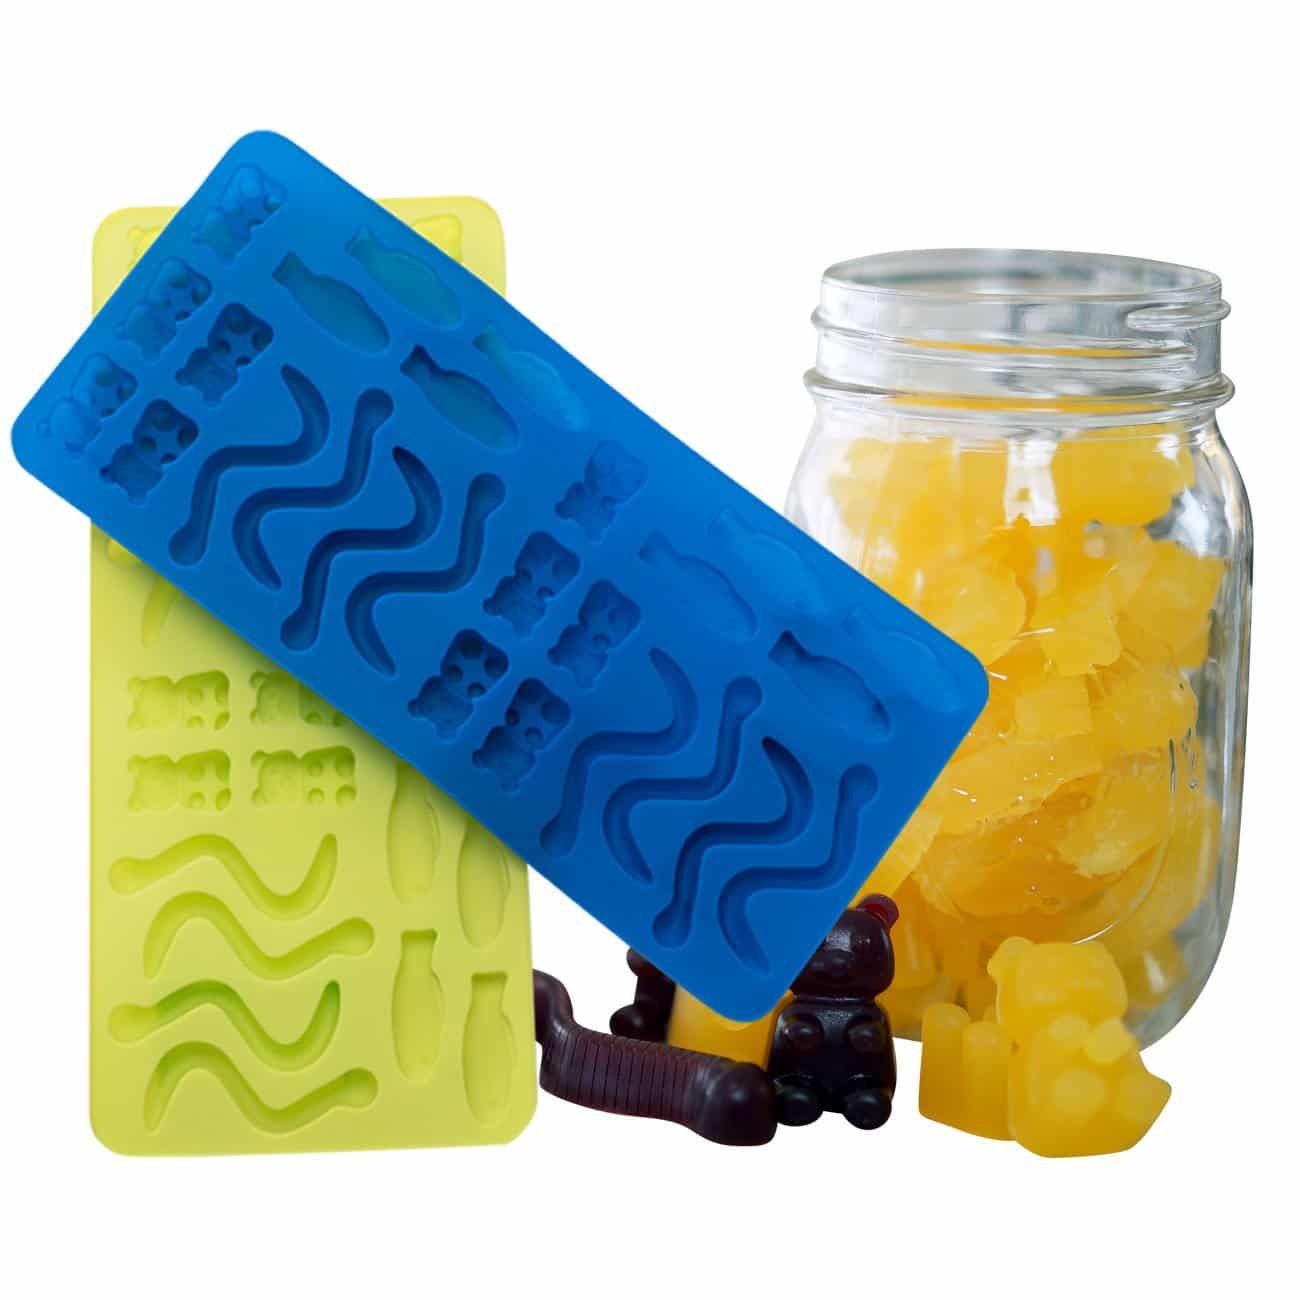 LIGHTNING DEAL ALERT! Childrens Worms and Swedish Fish Mold – 44% off